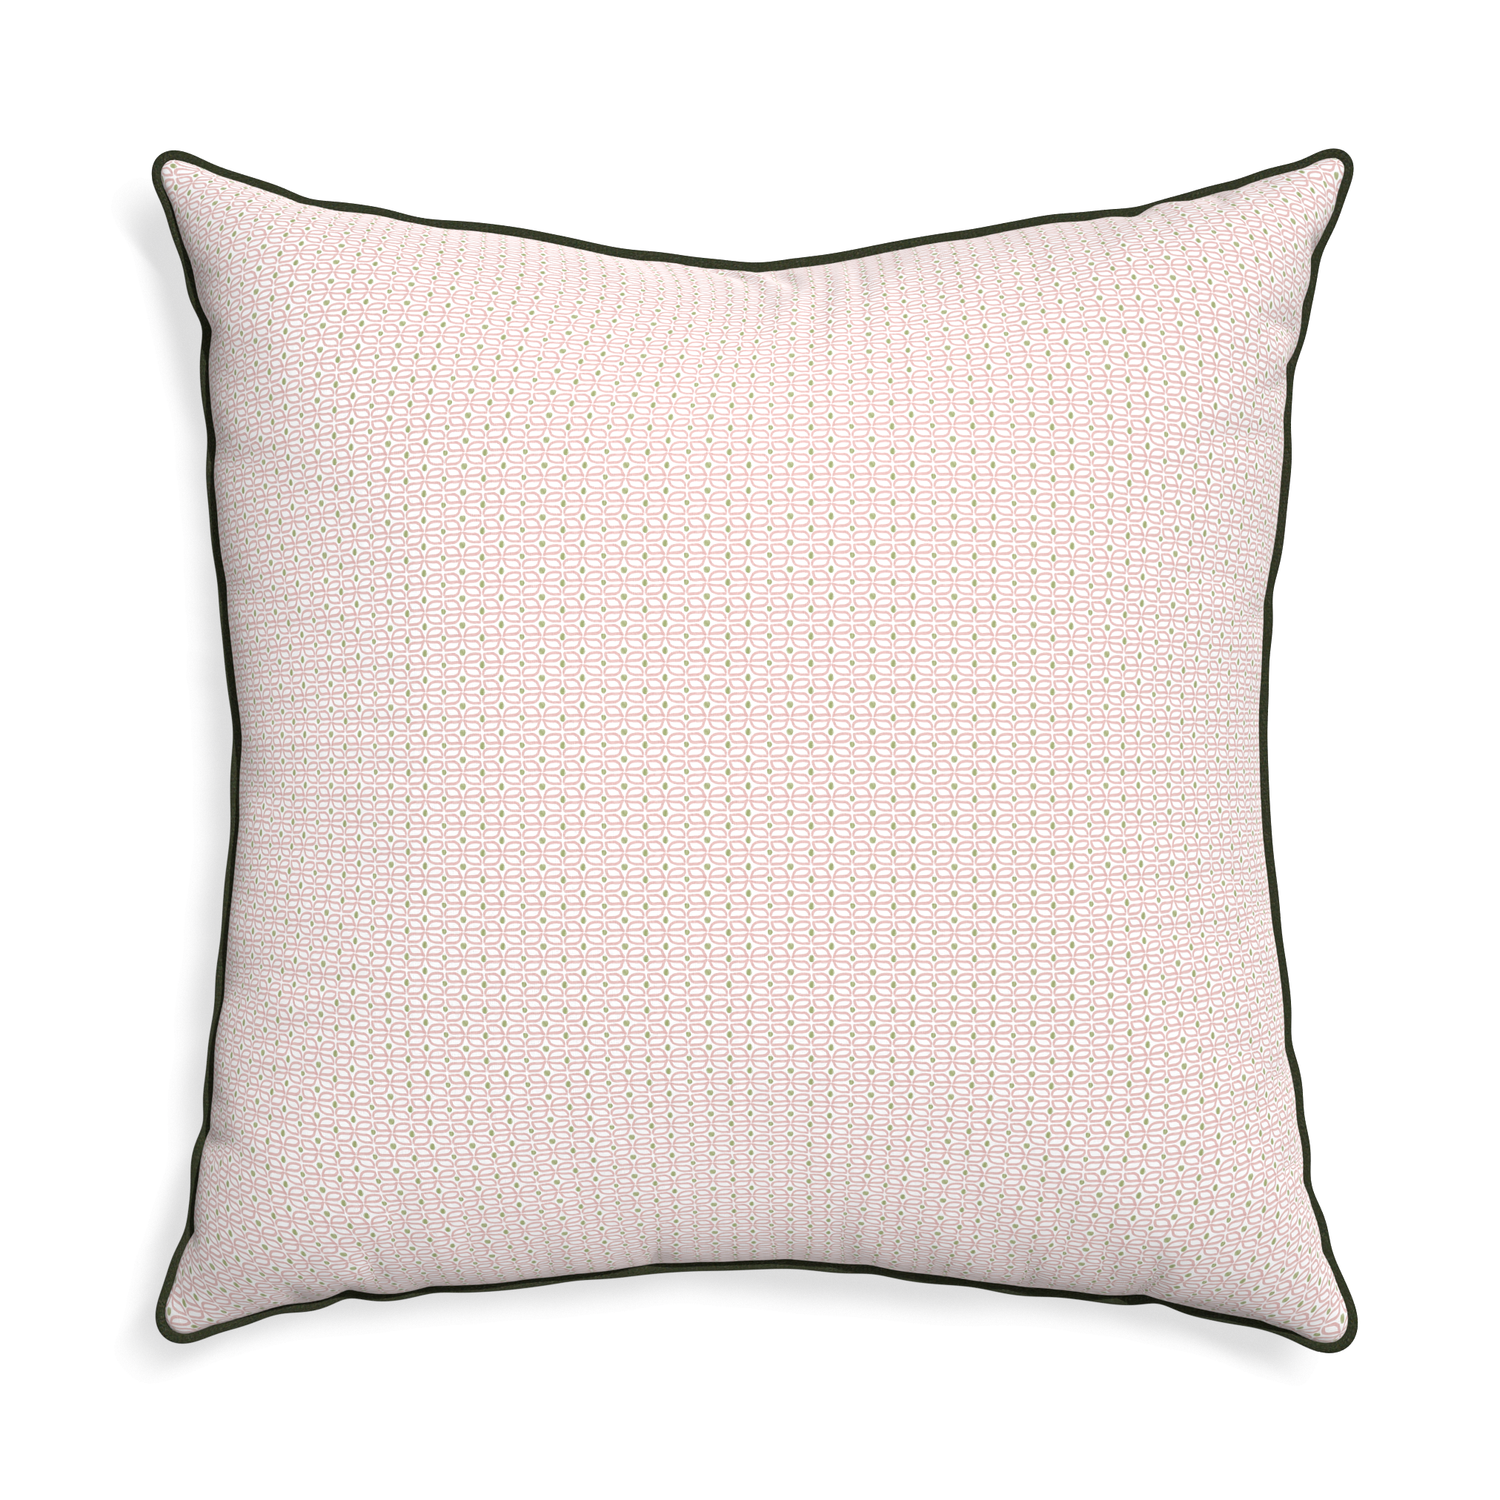 Euro-sham loomi pink custom pink geometricpillow with f piping on white background